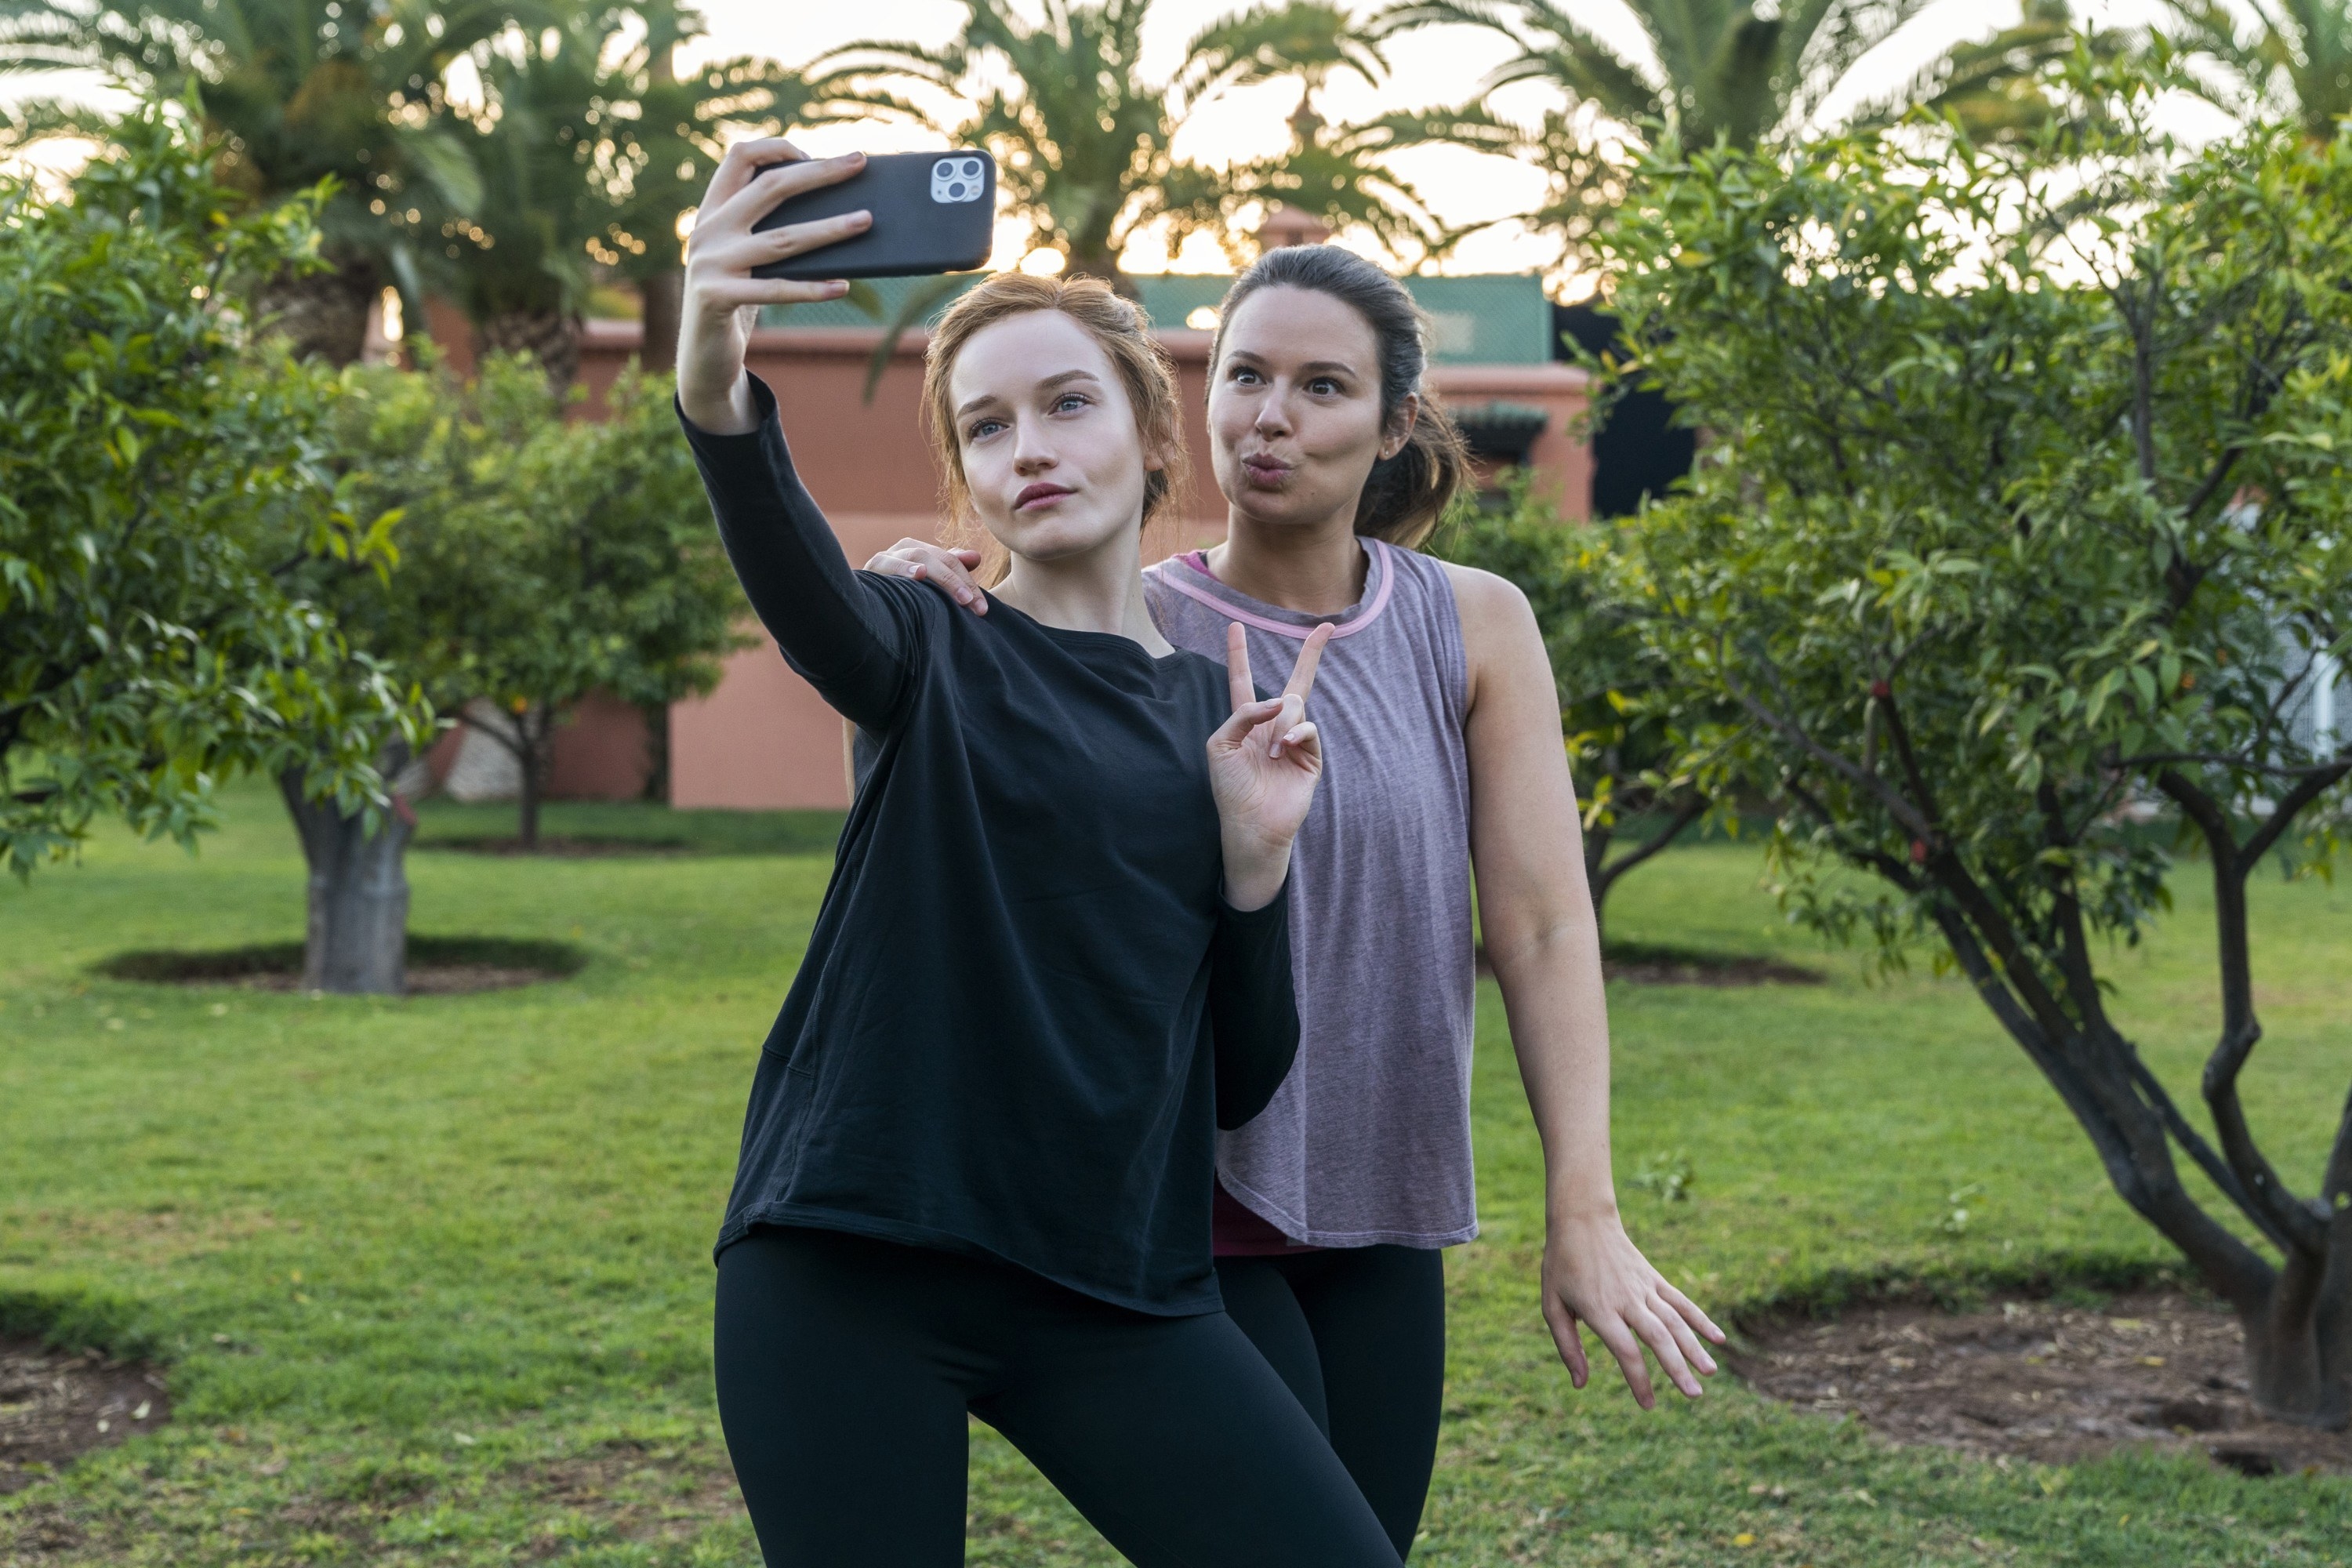 Rachel and Anna&#x27;s characters taking a selfie outside